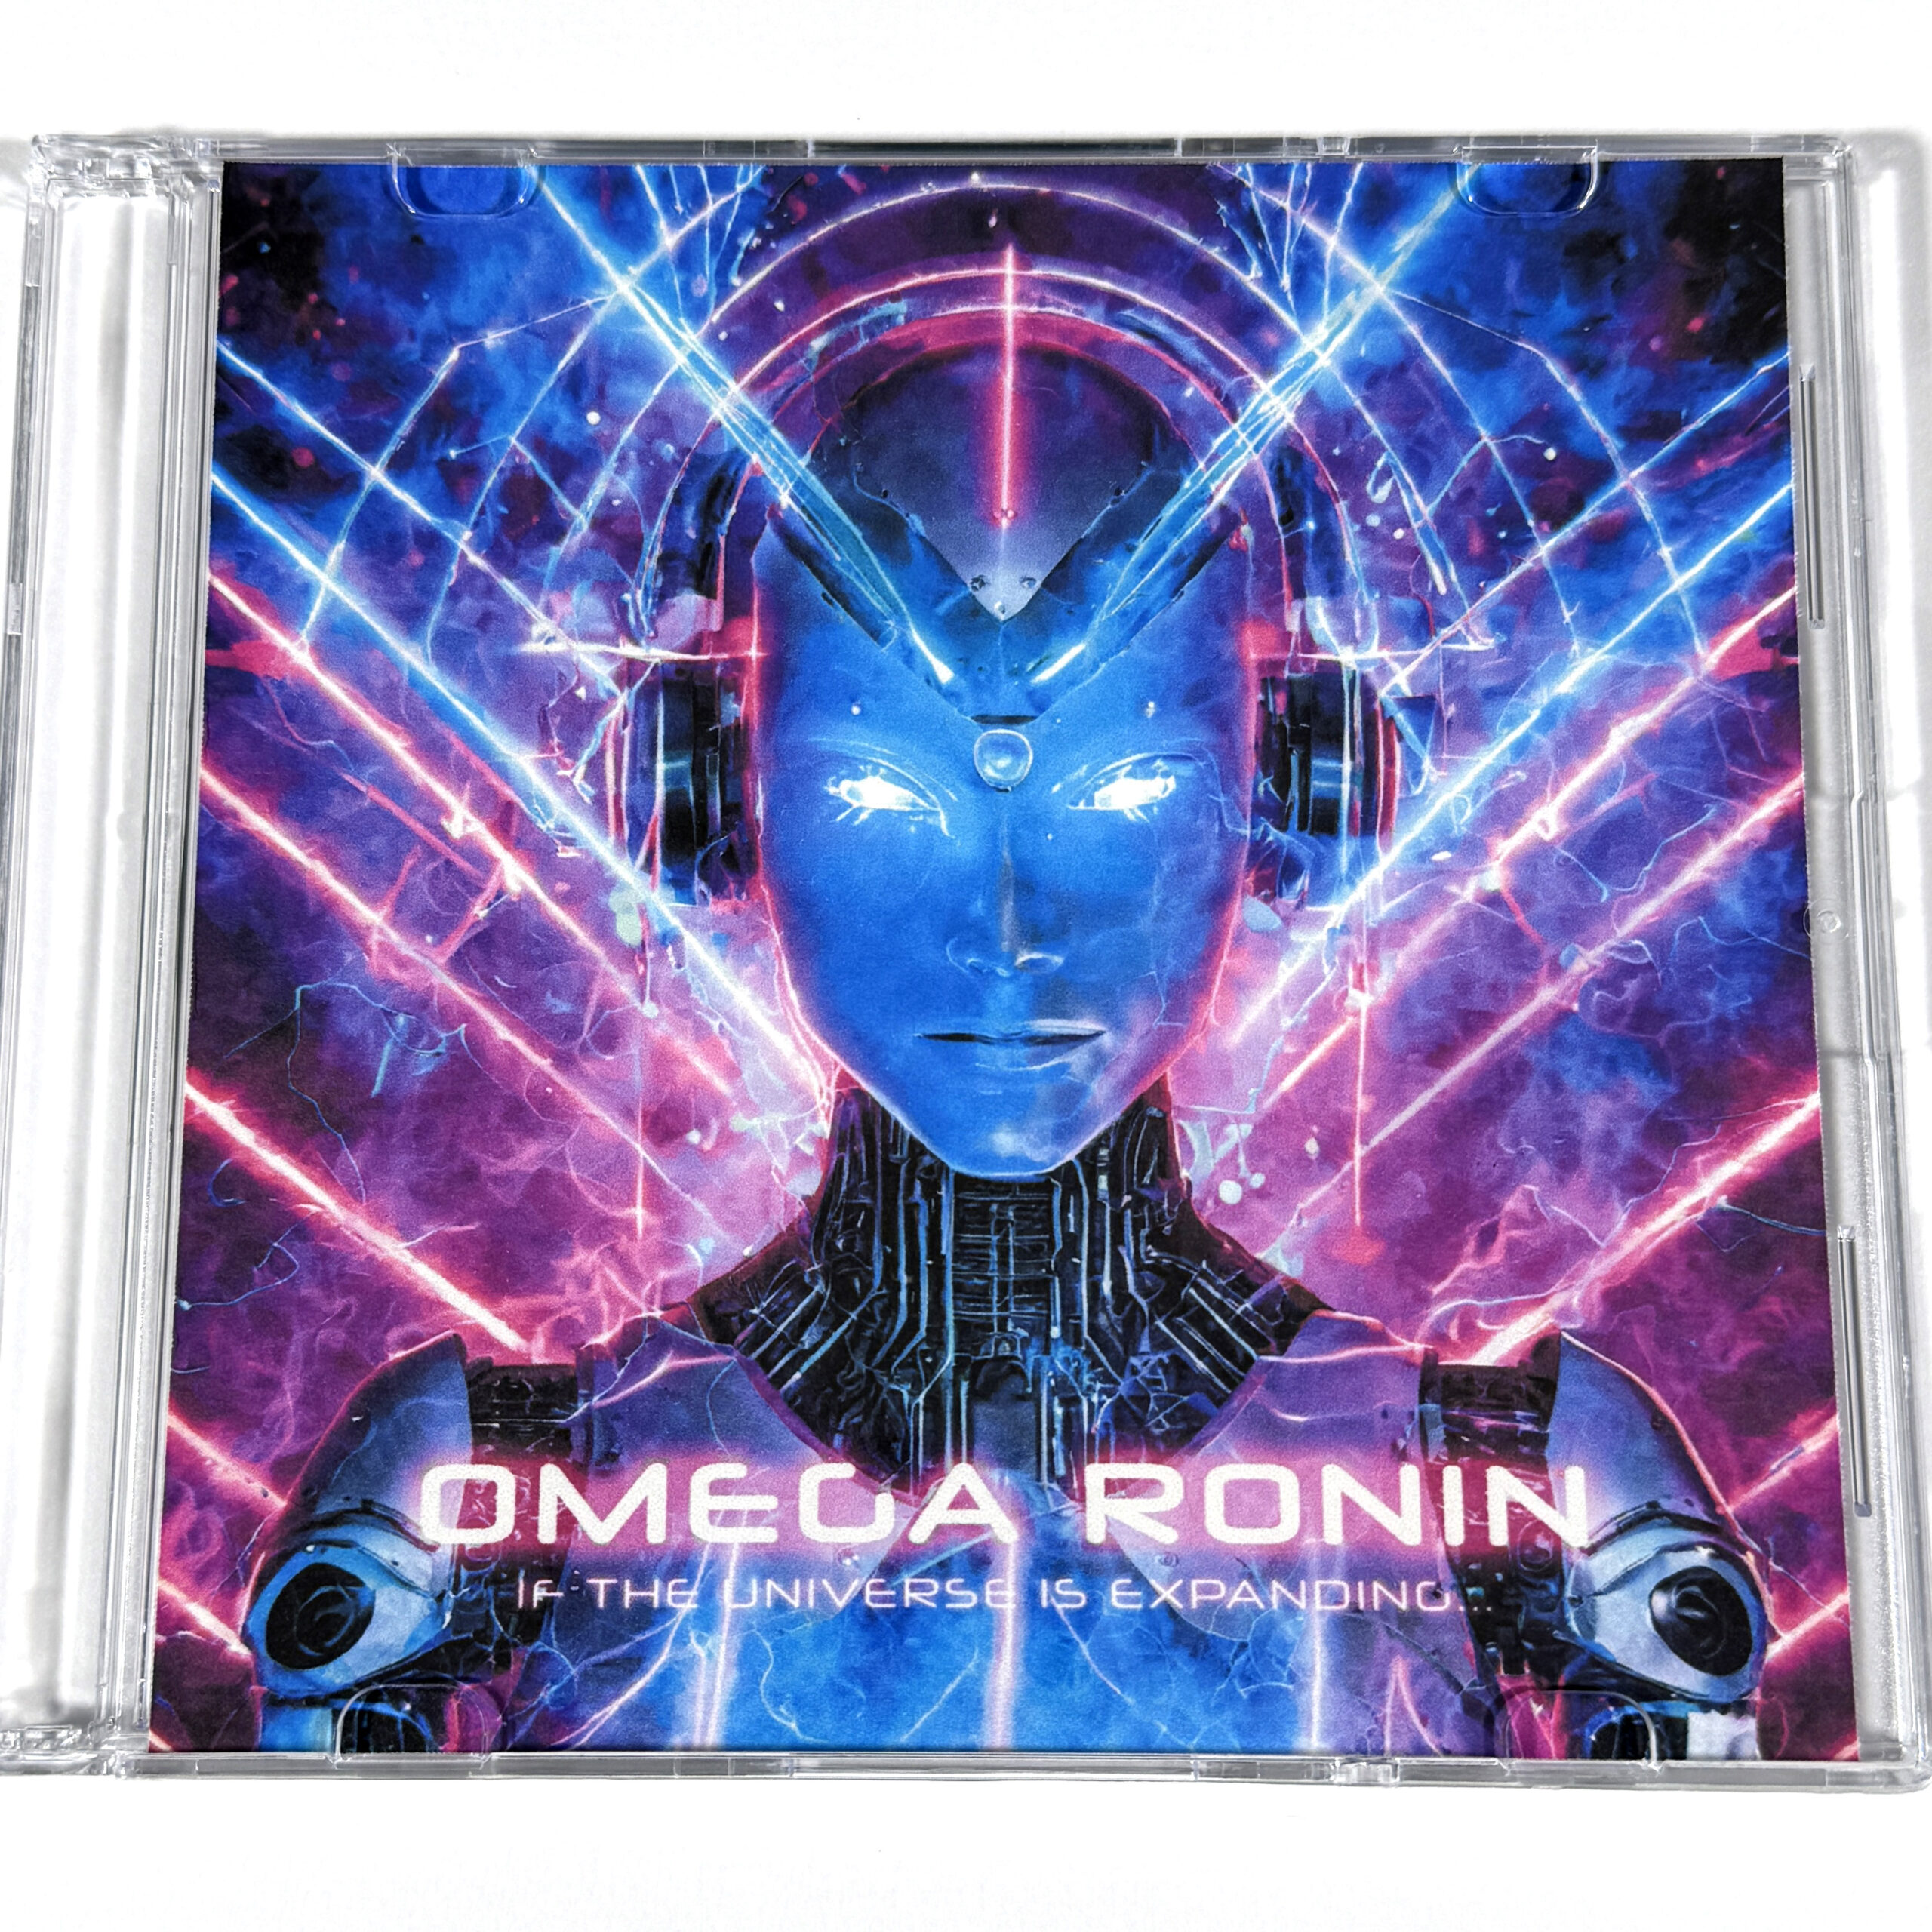 Omega Ronin: If the Universe is Expanding... CD (Super Extended Edition)